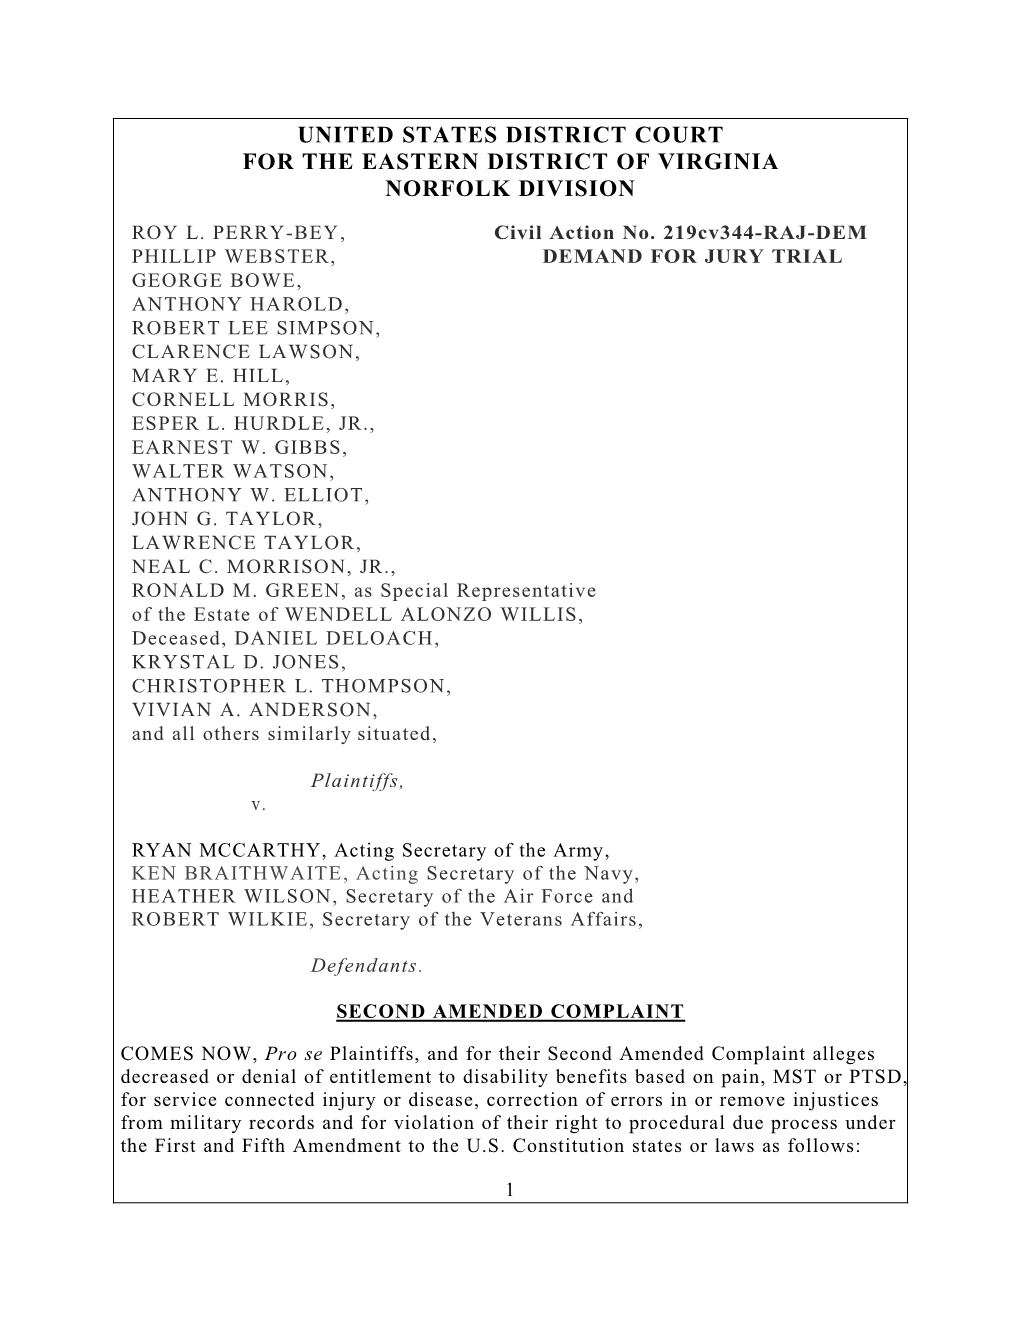 Civil Action No. 219Cv344-RAJ-DEM PHILLIP WEBSTER, DEMAND for JURY TRIAL GEORGE BOWE, ANTHONY HAROLD, ROBERT LEE SIMPSON, CLARENCE LAWSON, MARY E